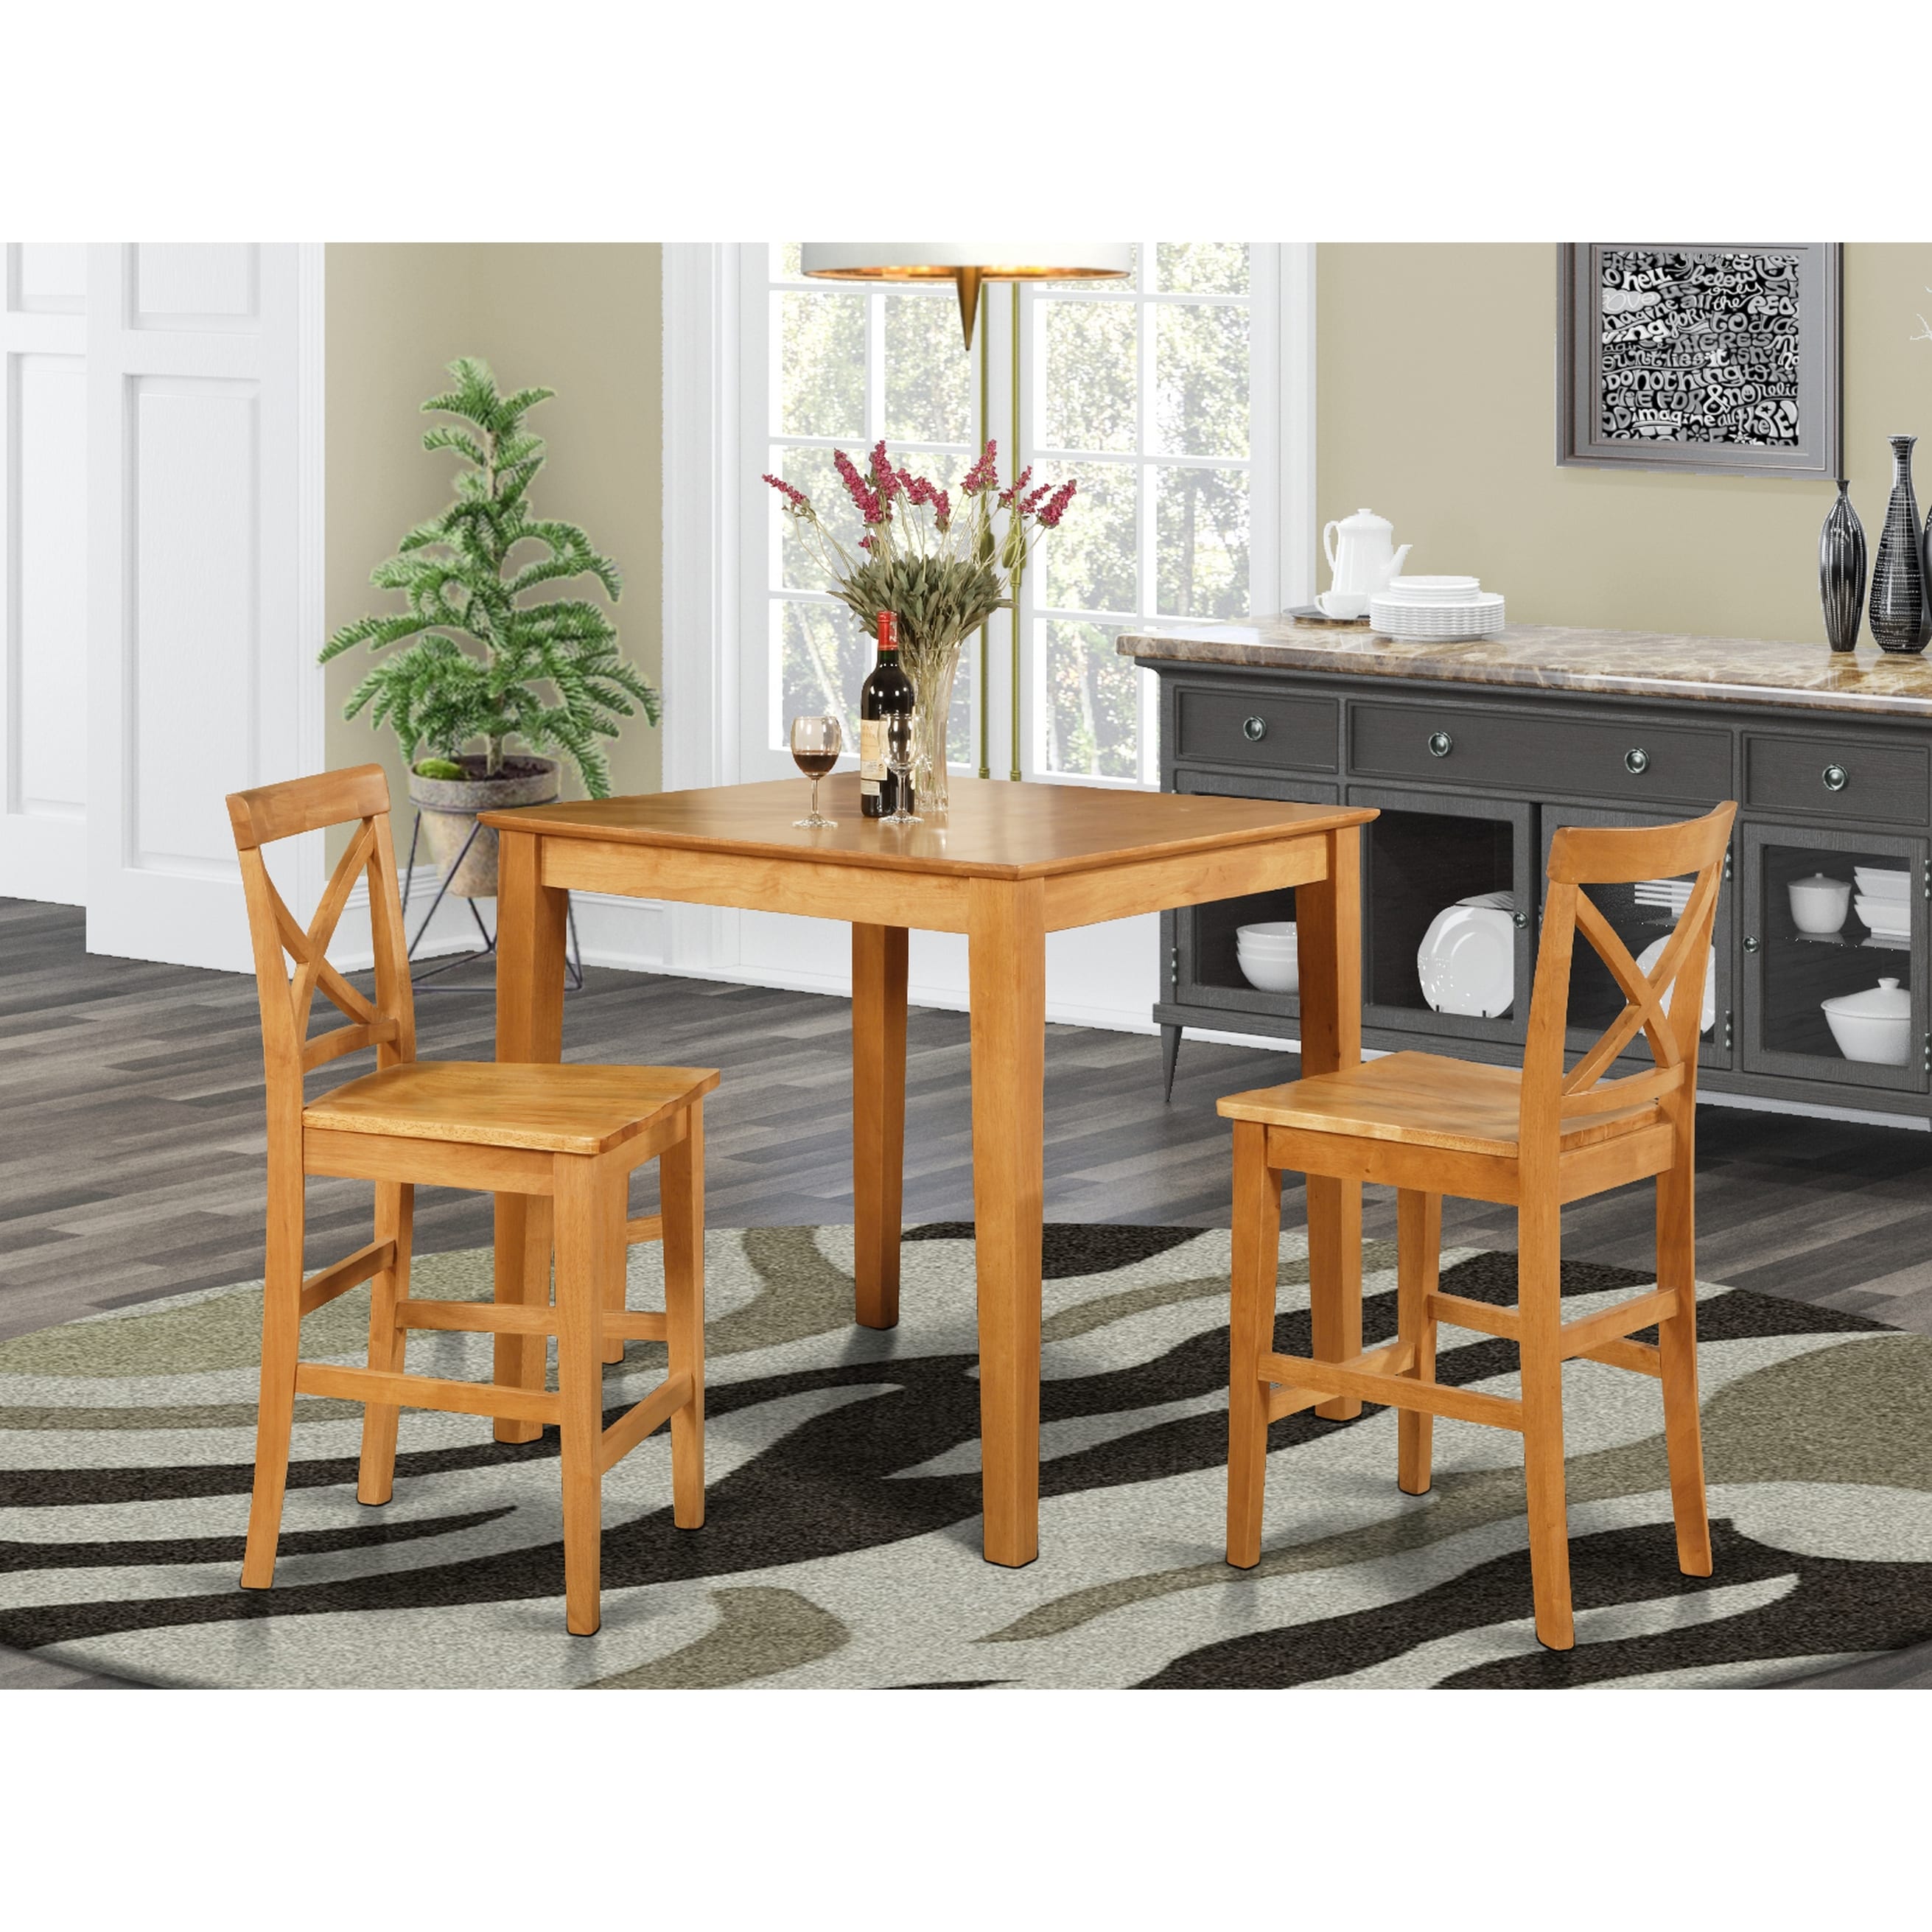 Oak Pub Table And 2 Kitchen Counter Chairs 3 Piece Dining Set On Sale Overstock 10201191